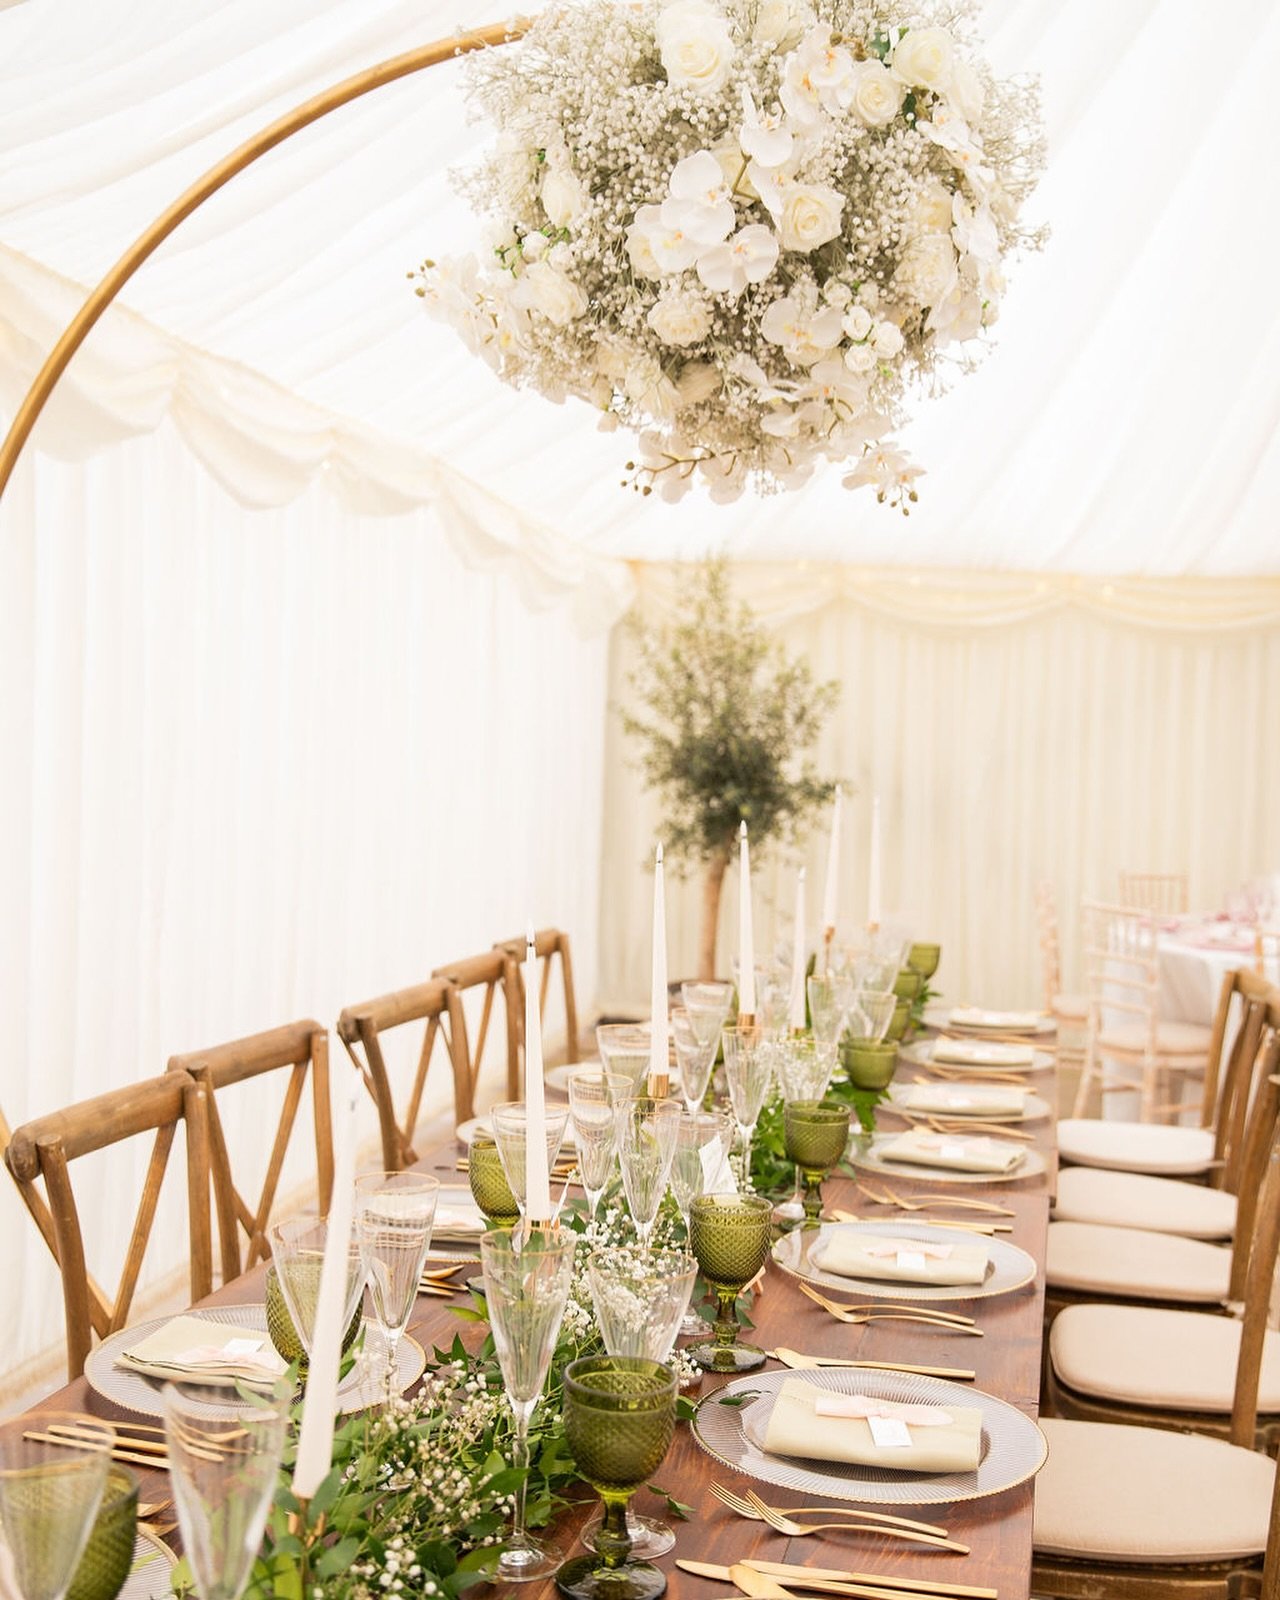 We hope you&rsquo;ve had a fab bank holiday if it&rsquo;s got you thinking about your wedding or event reach out to us and let&rsquo;s get the ball rolling! 

Venue: @burningfold
Photographer: @jo_sweeney_photography
Florist: @budandflower_
Dresses: 